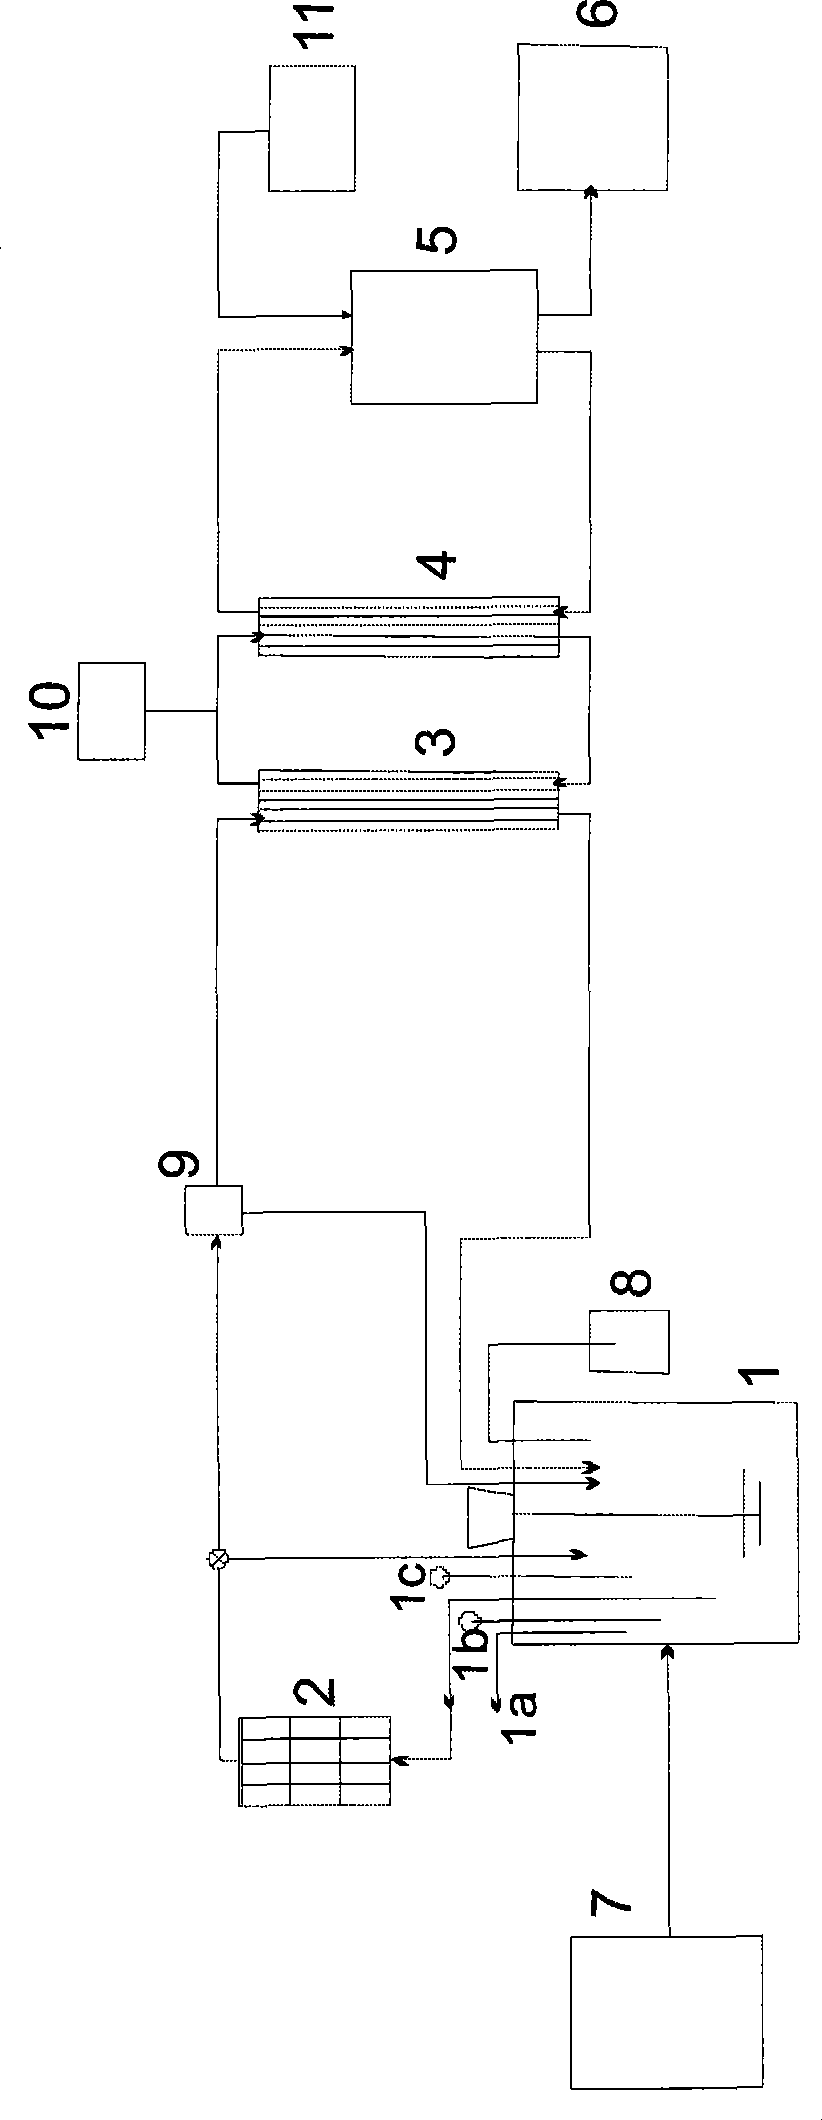 Method and device for producing n-butyric acid by microbial catalysis